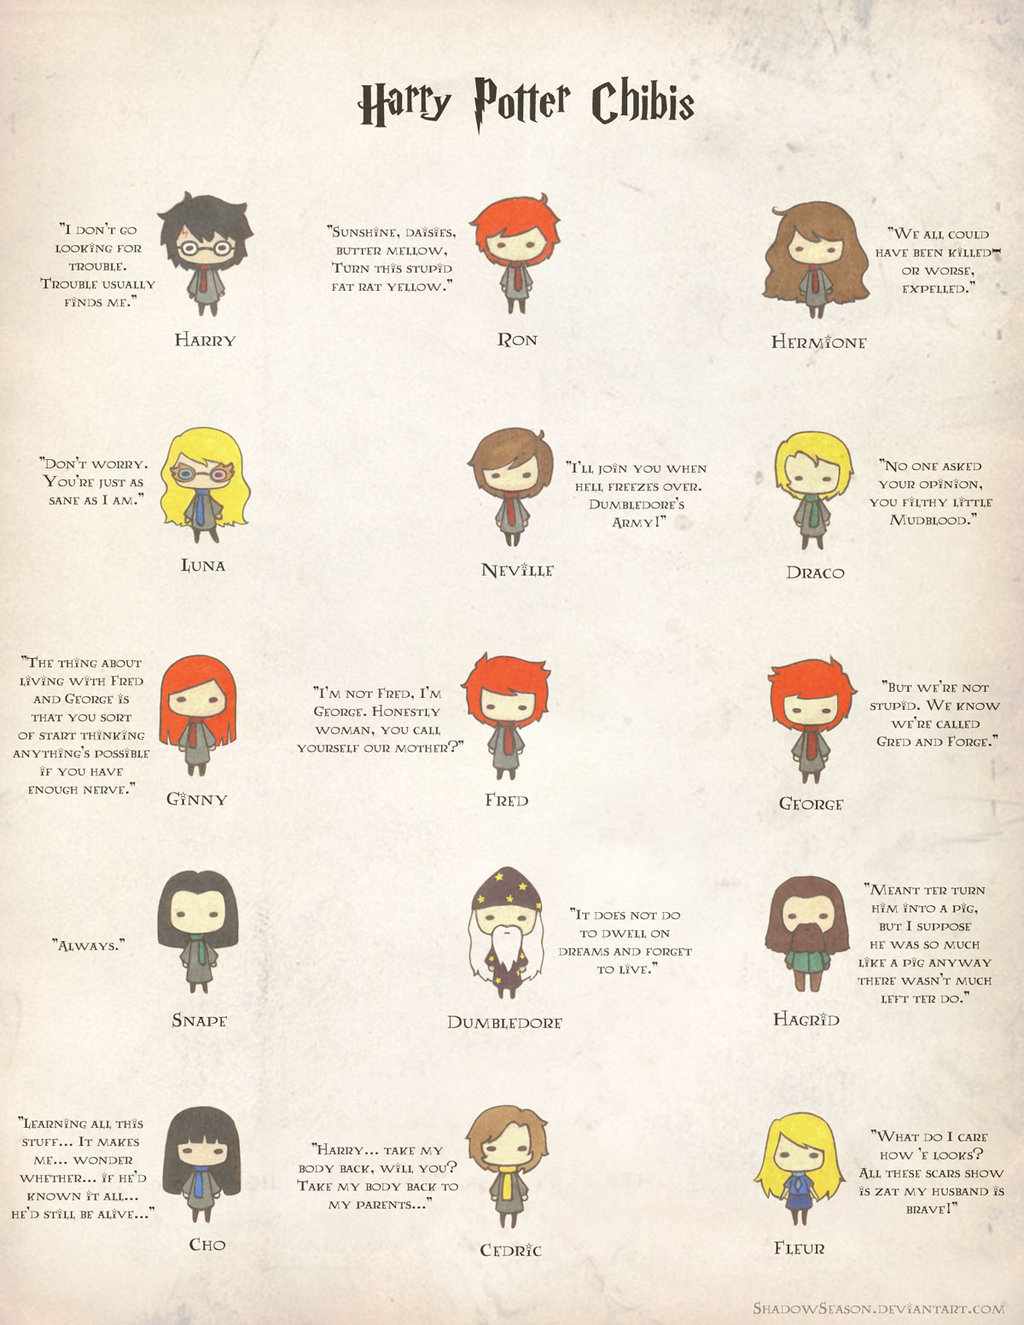 Iconic Traits of Harry Potter Characters